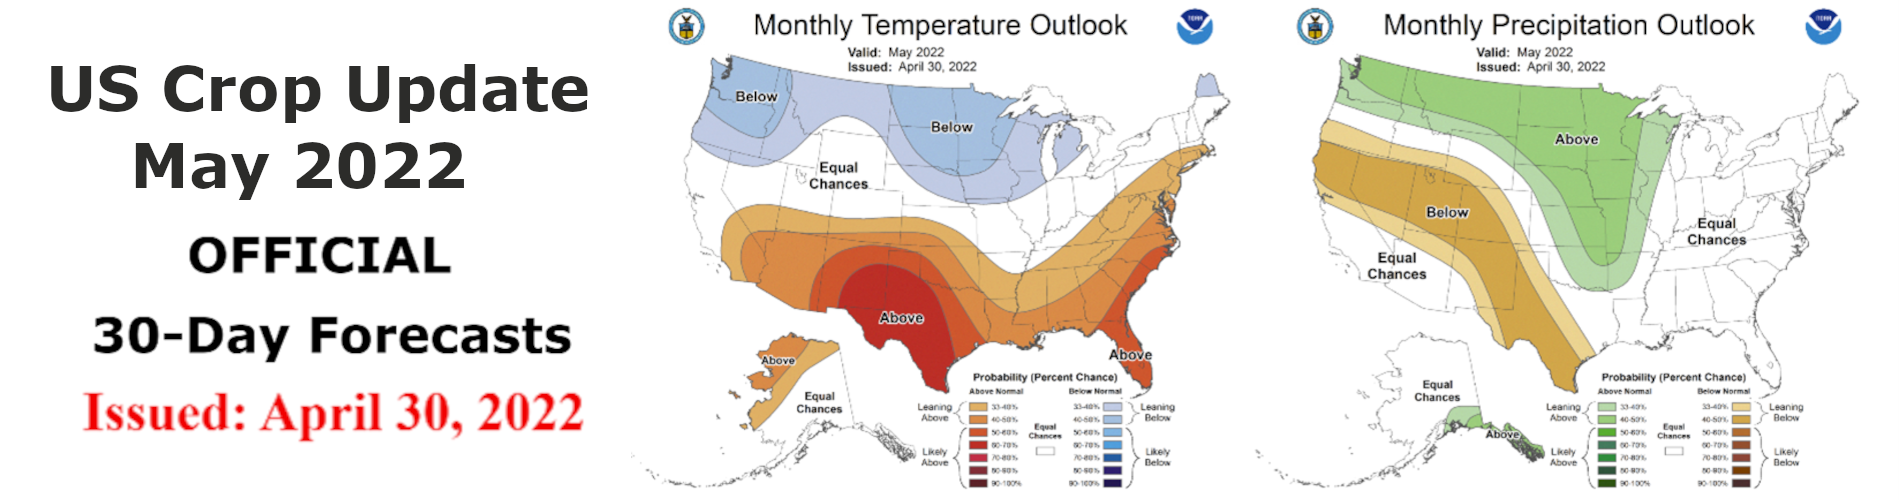 Monthly temperature and precipitation outlook for June